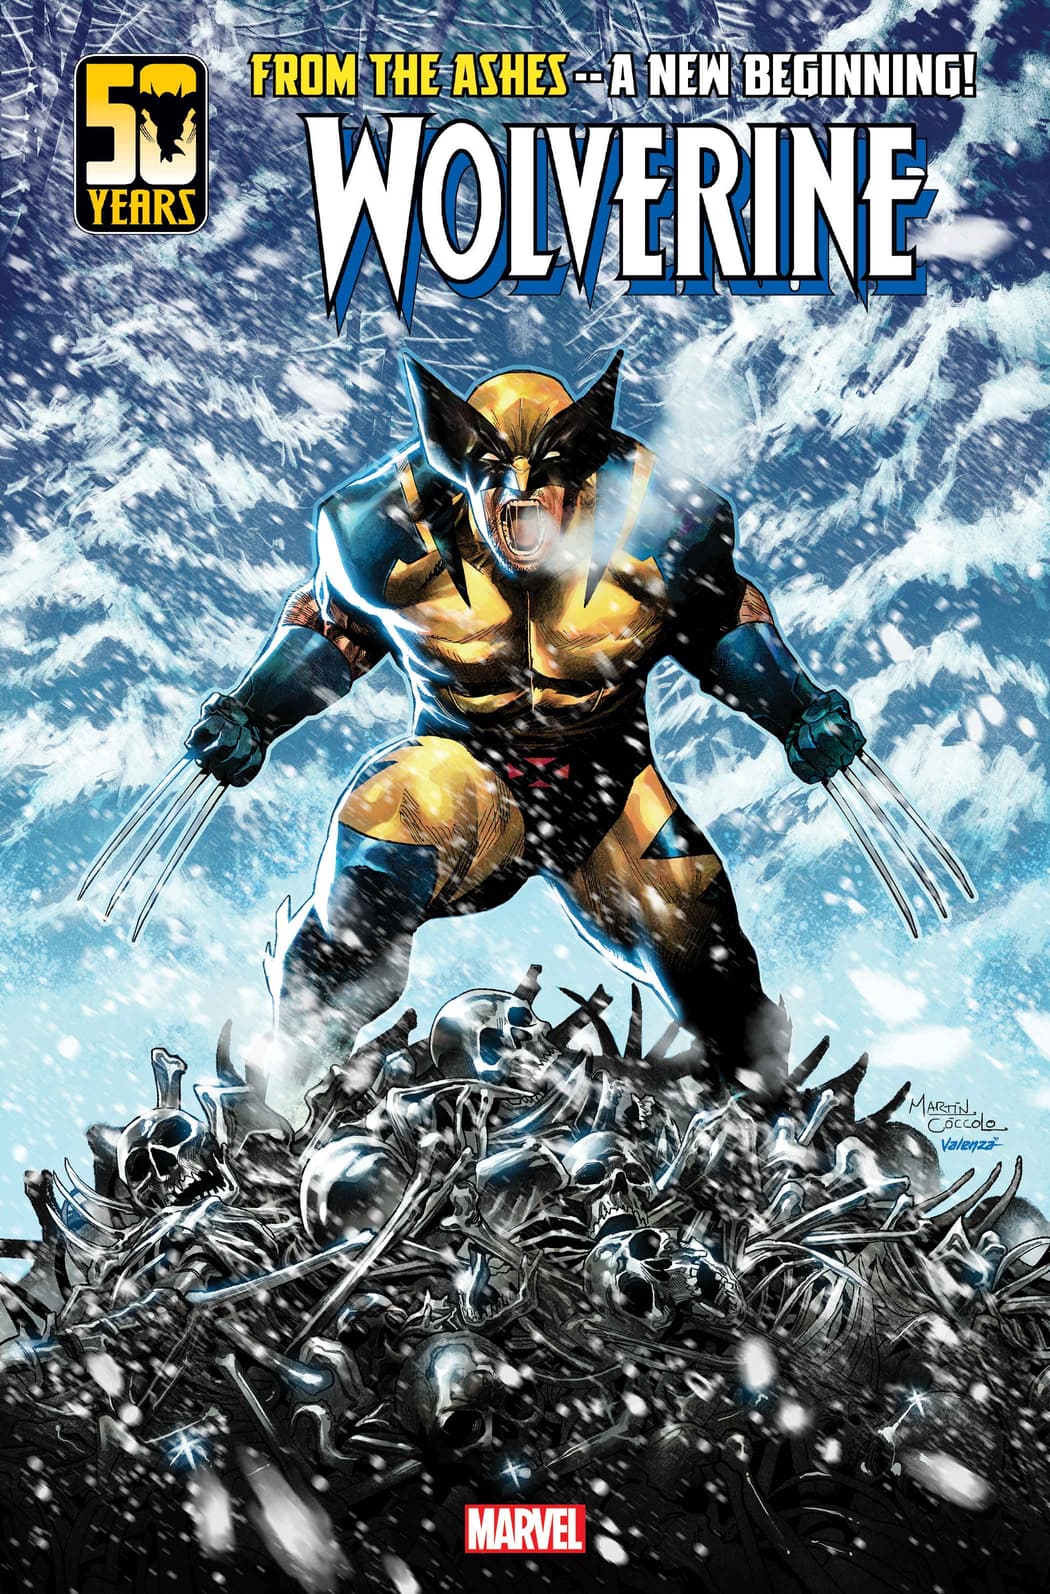 WOLVERINE (2024) #1 cover by Martn Cccolo 